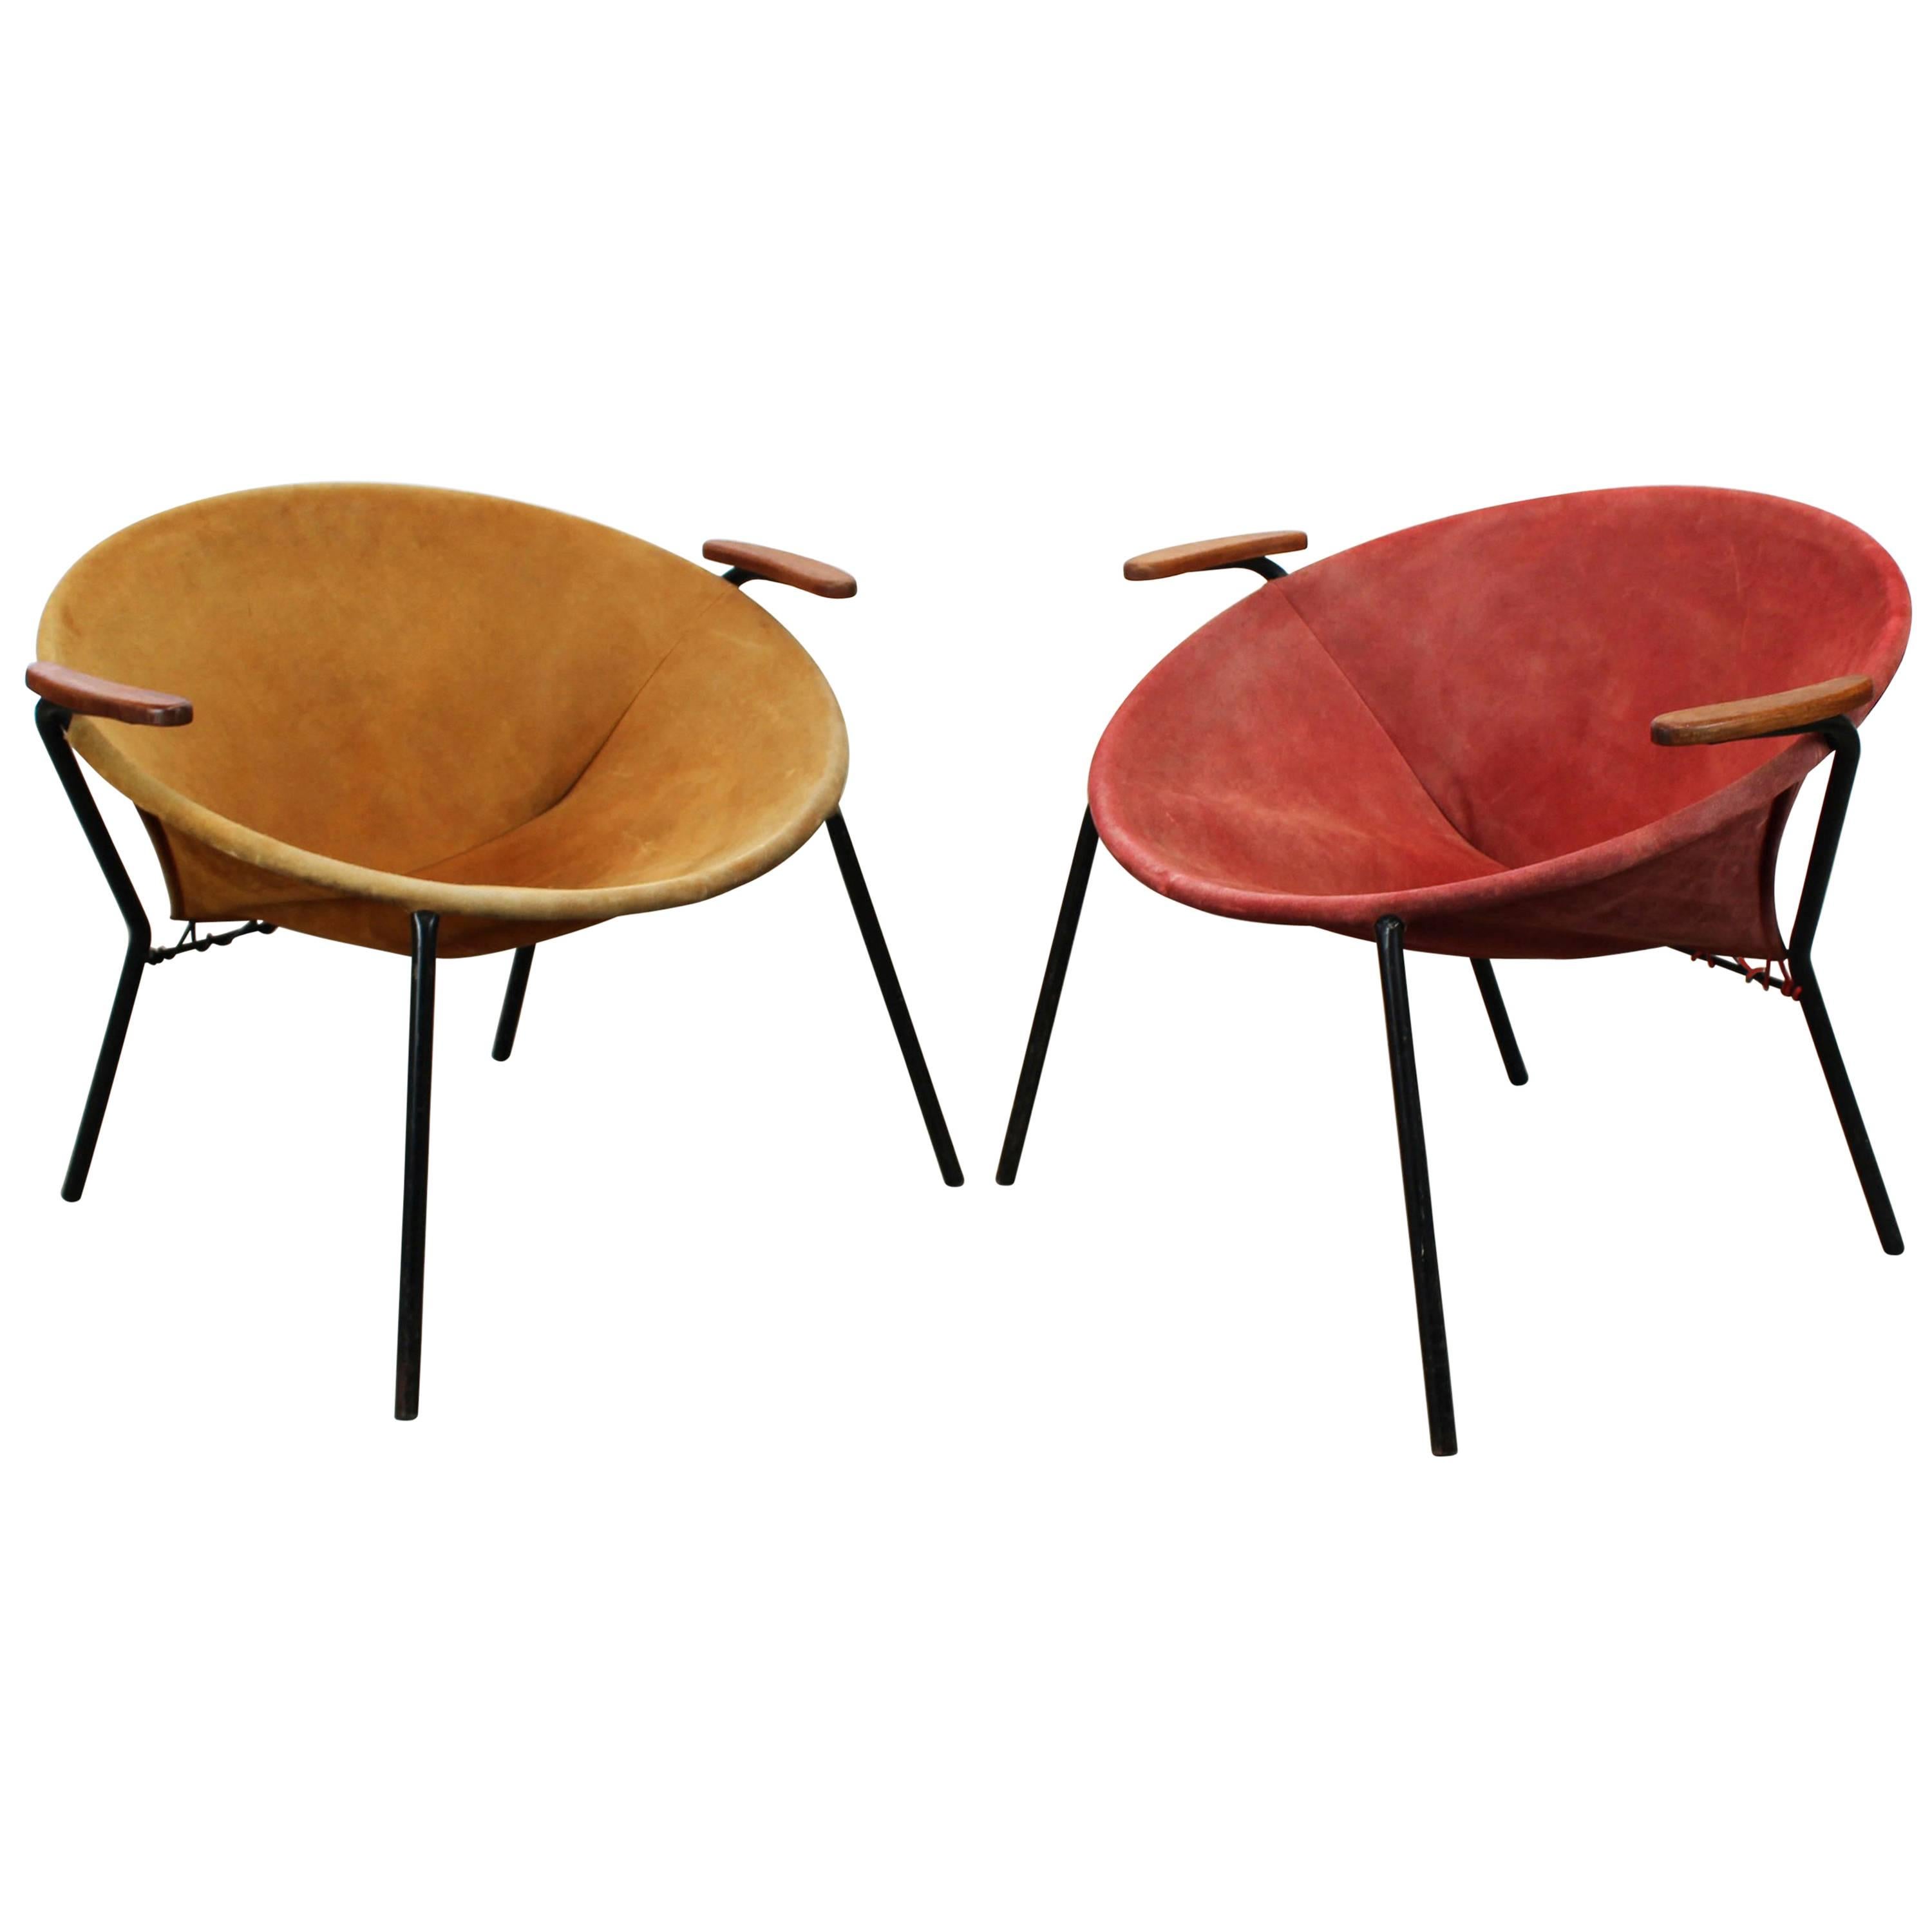 Pair of Colorful Balloon Lounge Chairs by Hans Olsen Teak Red Yellow Black, 1950